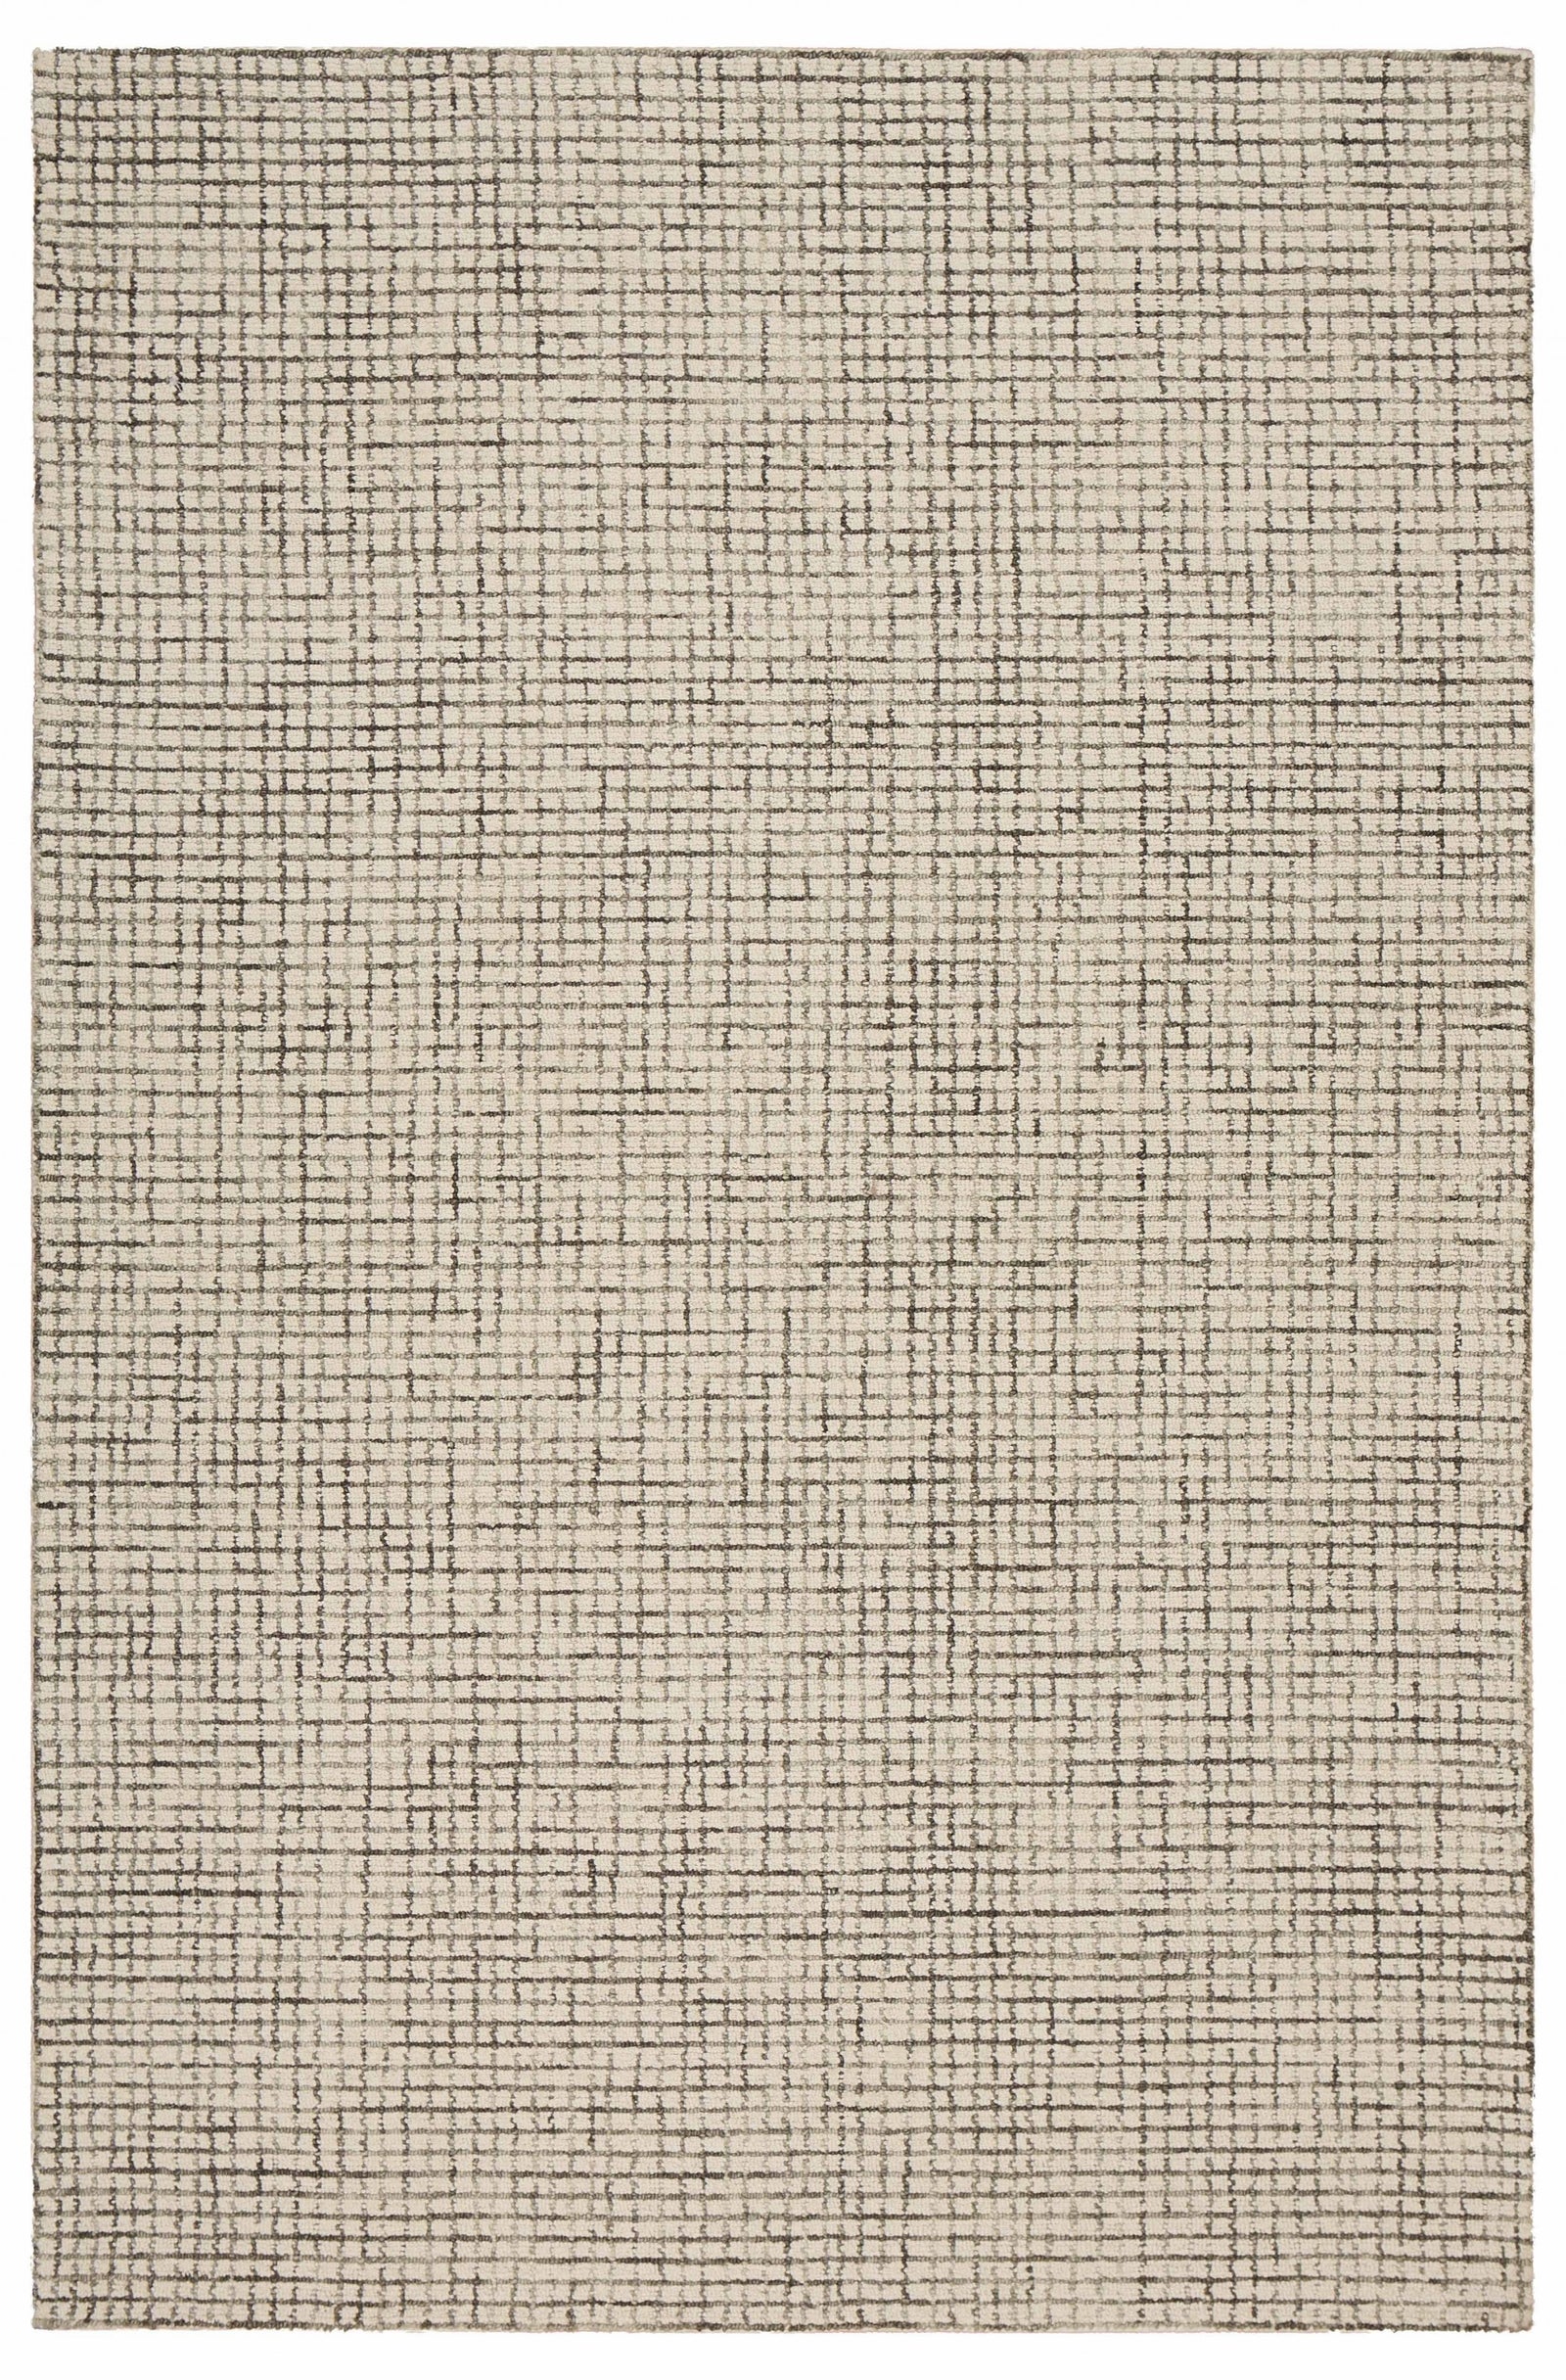 5’ x 8’ Tan and Ivory Grid Area Rug